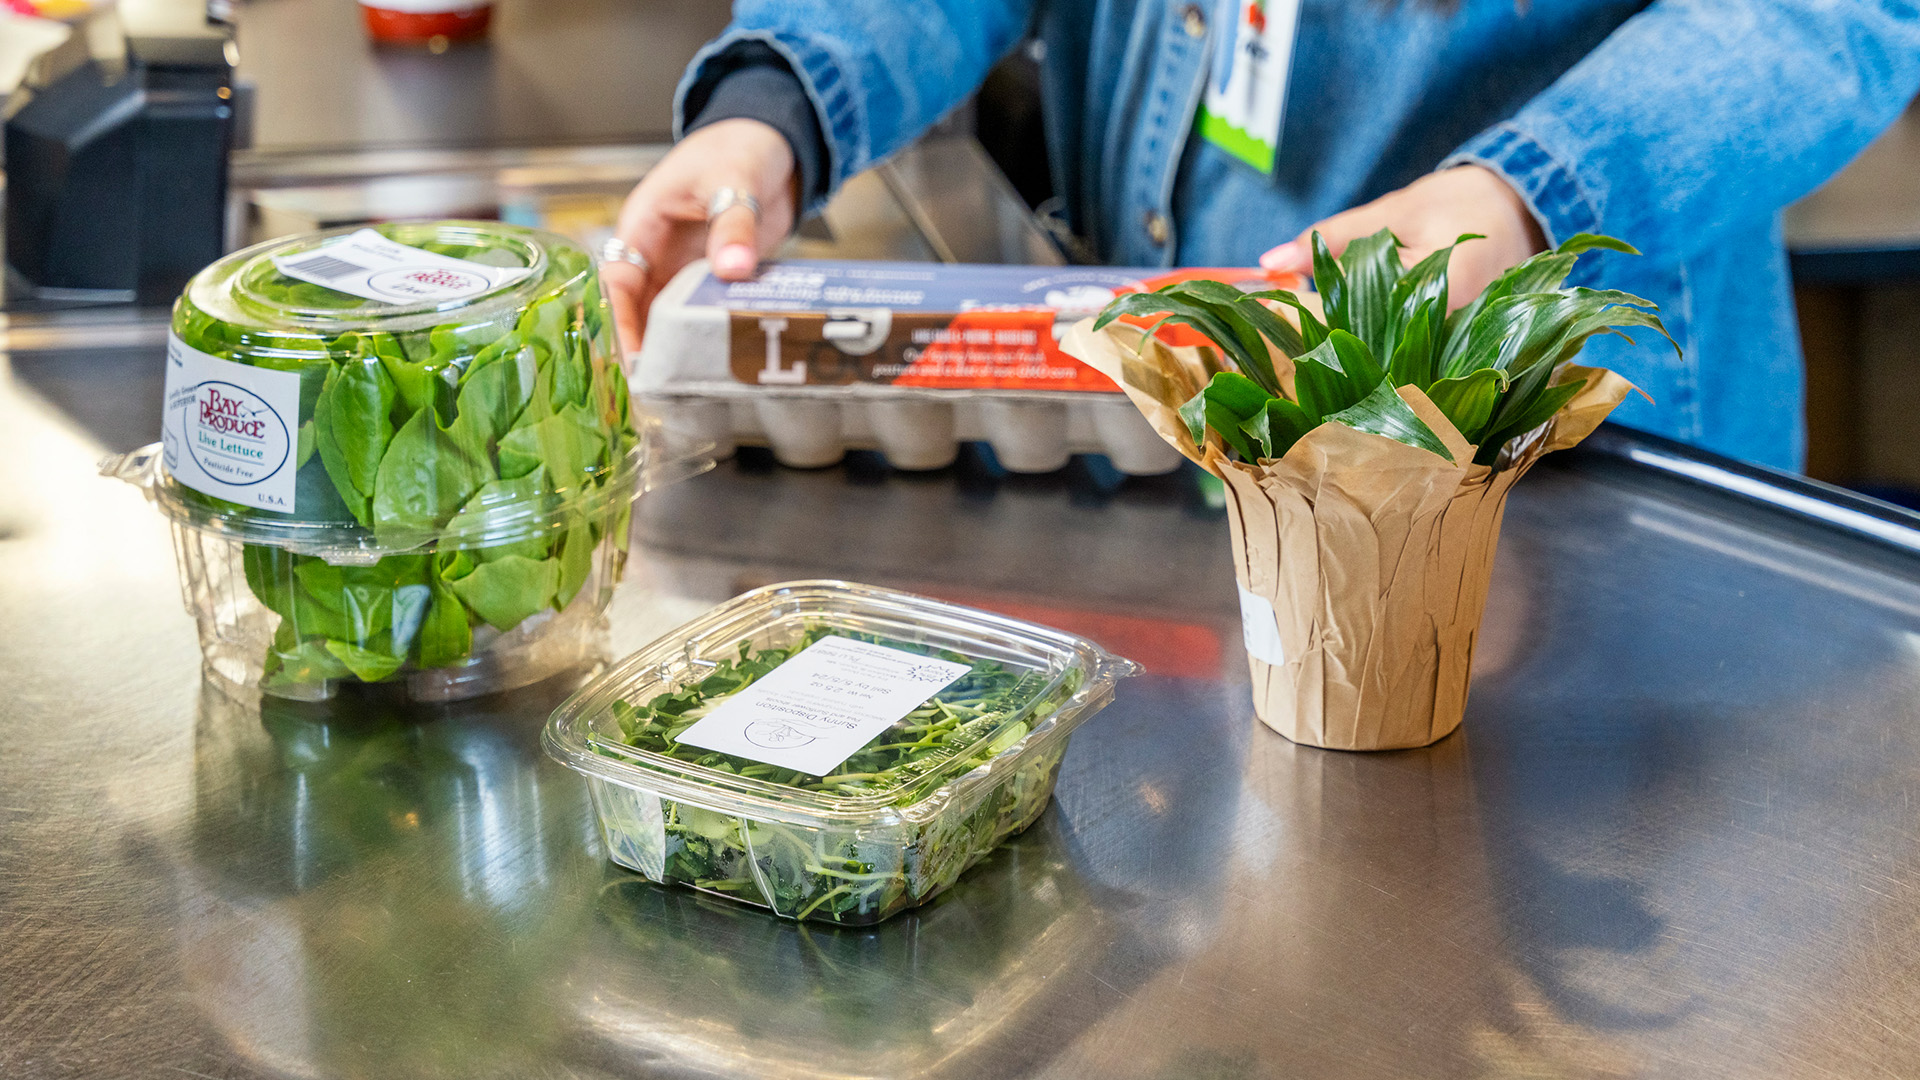 A person at a supermarket checkout places a carton of eggs, a potted plant, and two containers of leafy greens—all local produce—on the conveyor belt. The person's hands and part of a denim jacket are visible in the background.